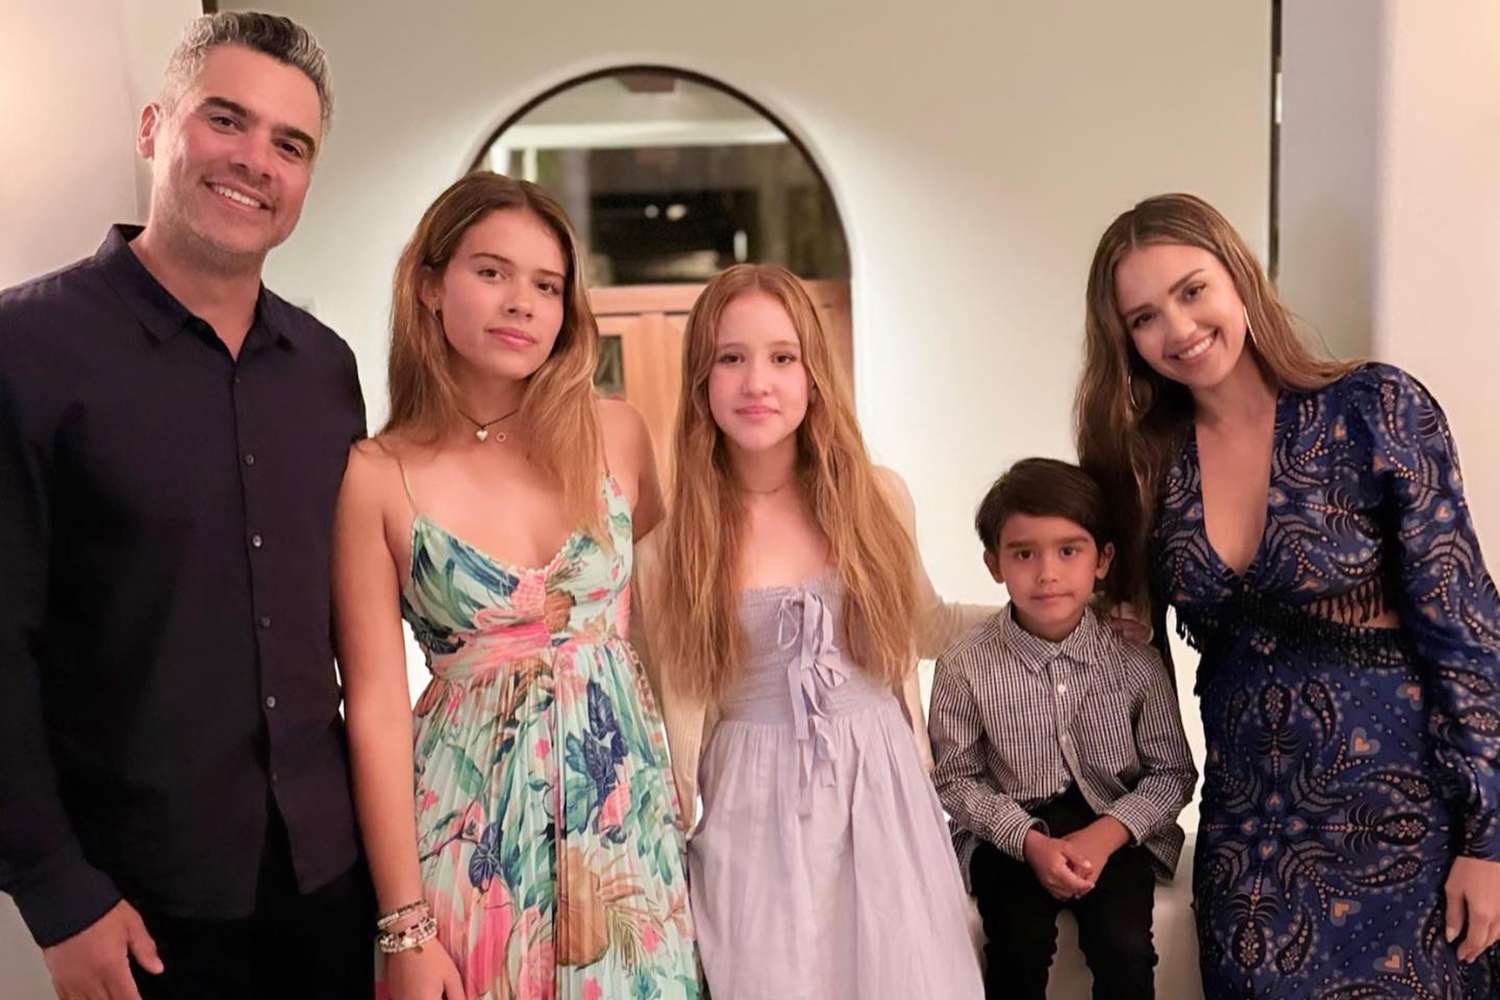 Jessica Alba Celebrates Mother's Day with Her 3 Kids in Sweet Photo: 'Felt the Love Today'